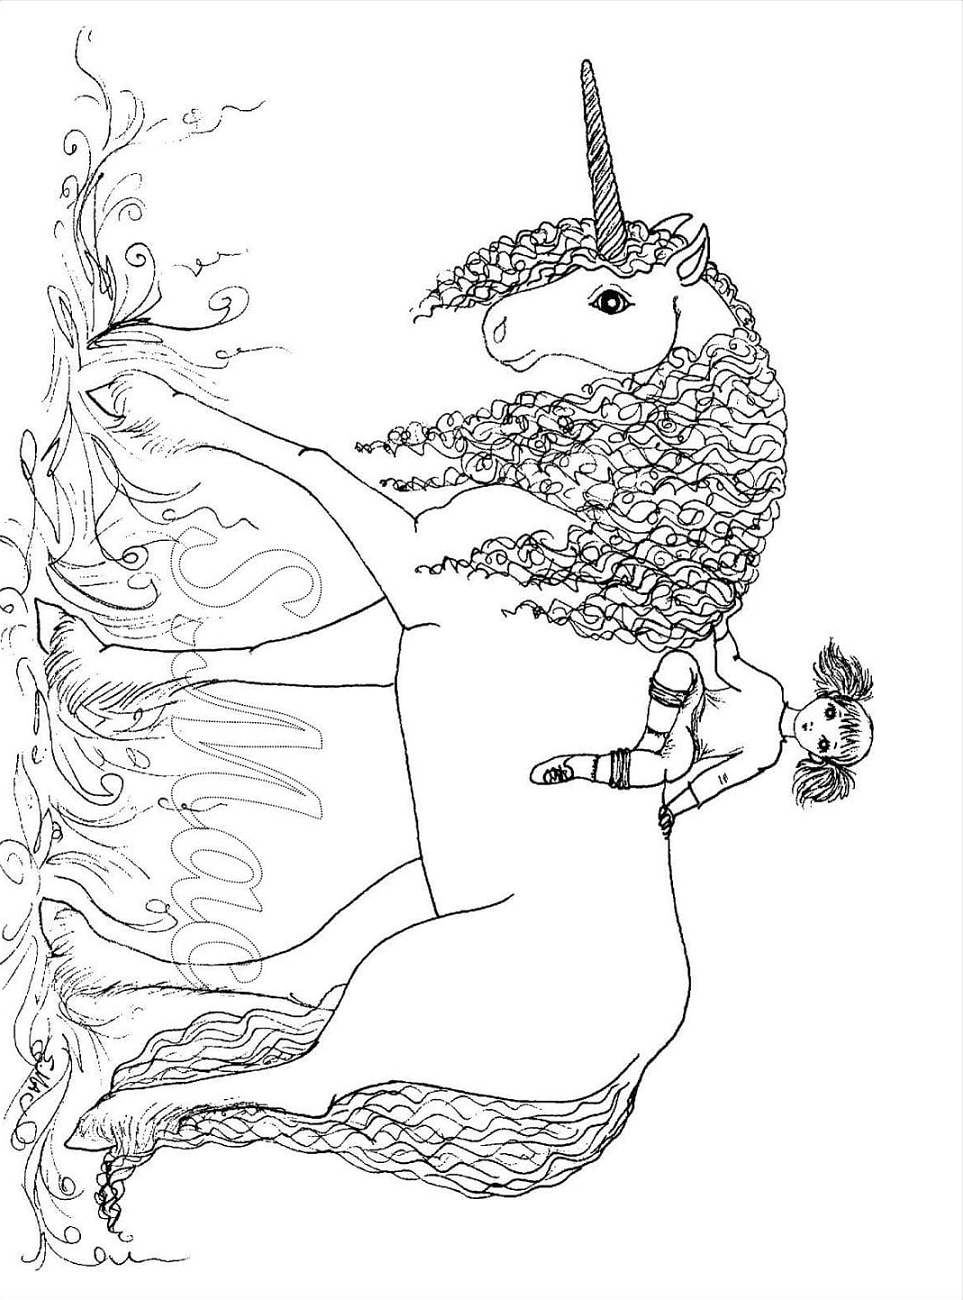 Little Girl On Unicorn Coloring Page - Free Printable Coloring Pages